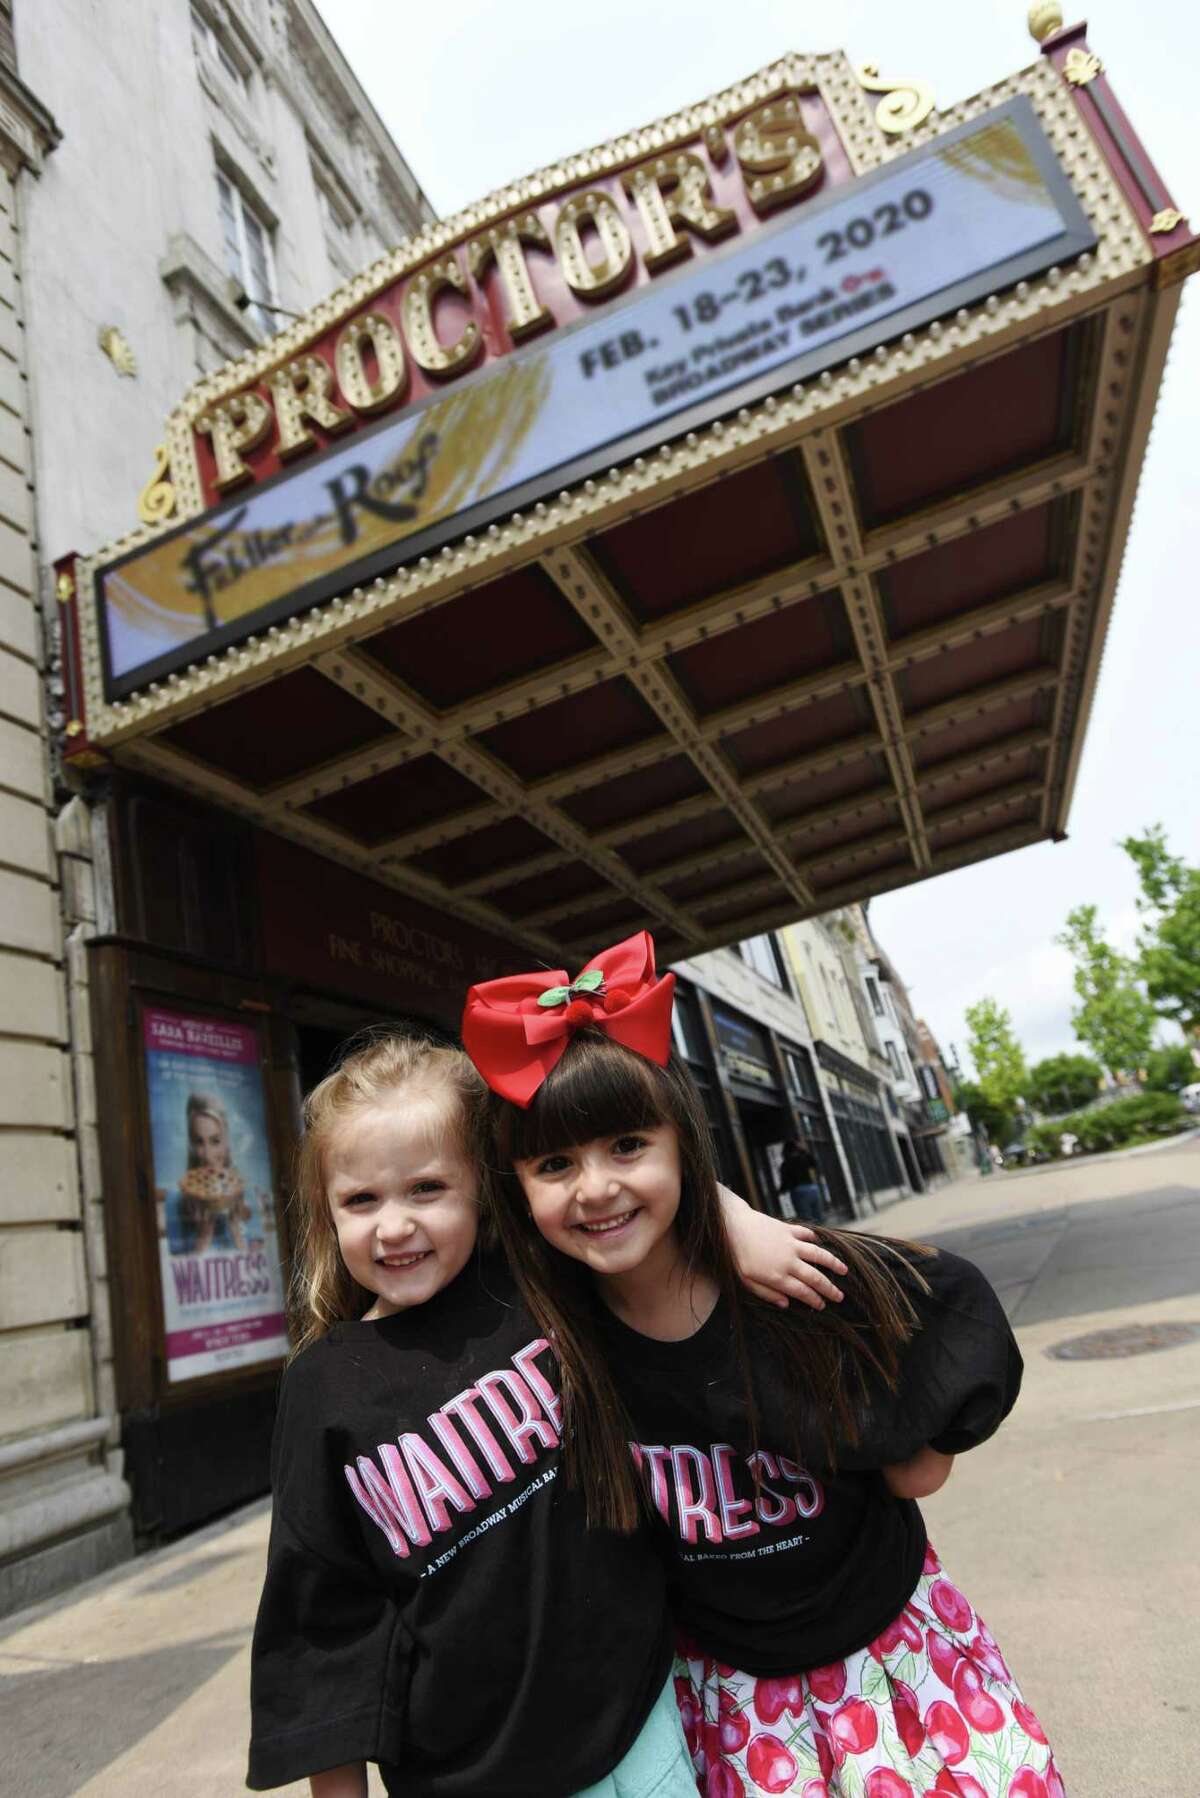 Genevieve Carmichael of Amsterdam, left, and Viviana DiMezza of Perth will play Lulu, the daughter of the title character in the musical "Waitress," playing at at Proctors June 11 to 16. (Photo courtesy Proctors.)